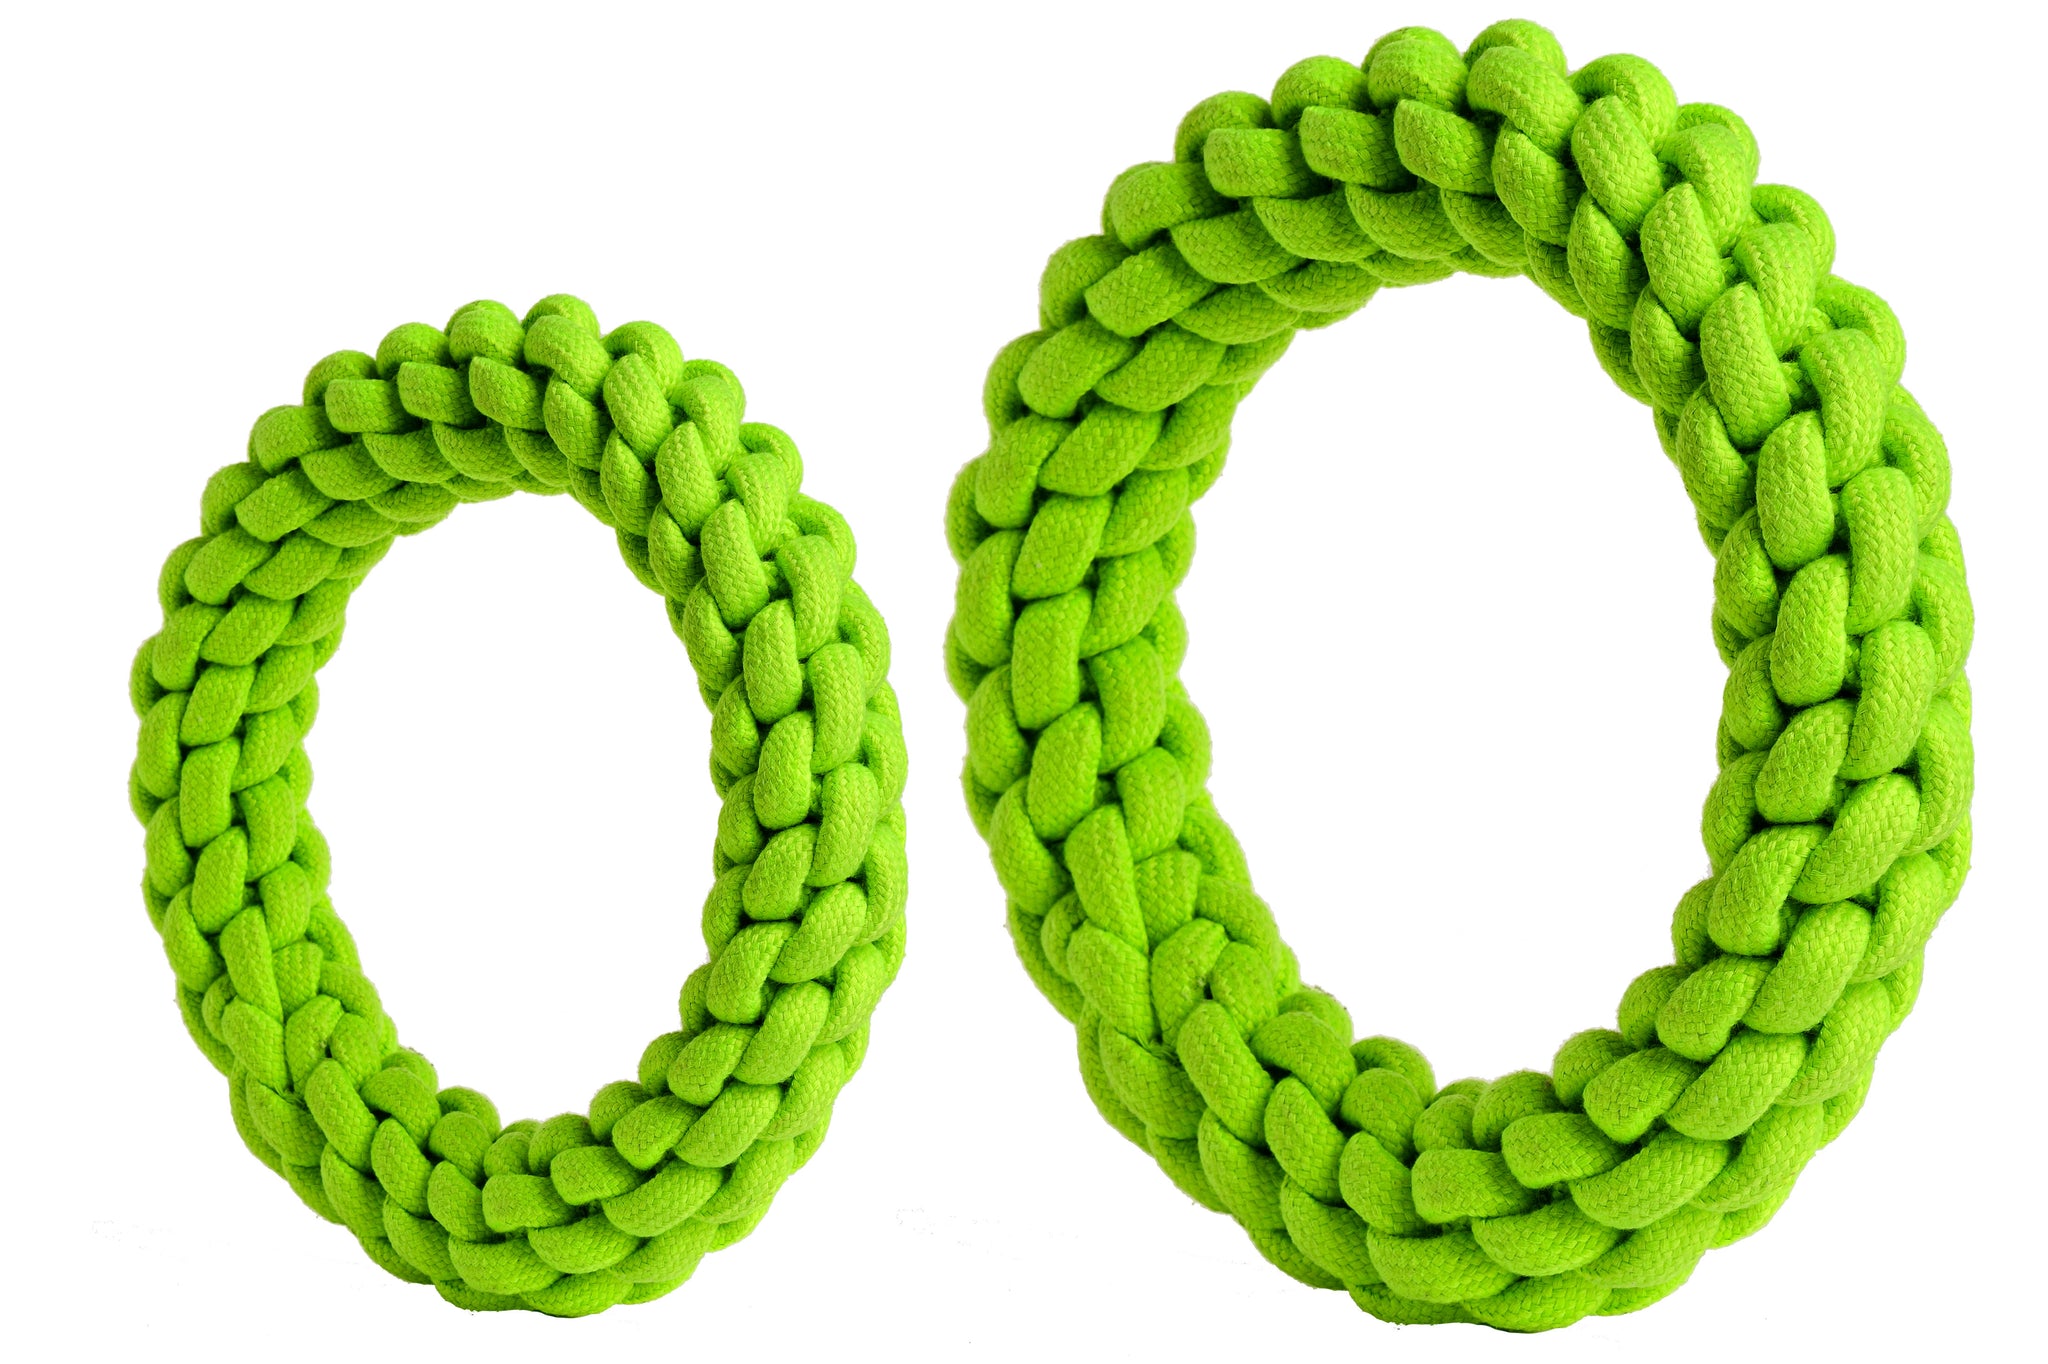 RompiDogz Big & Small Tug N' Toss Rope - 2pc Kit (SOLD OUT